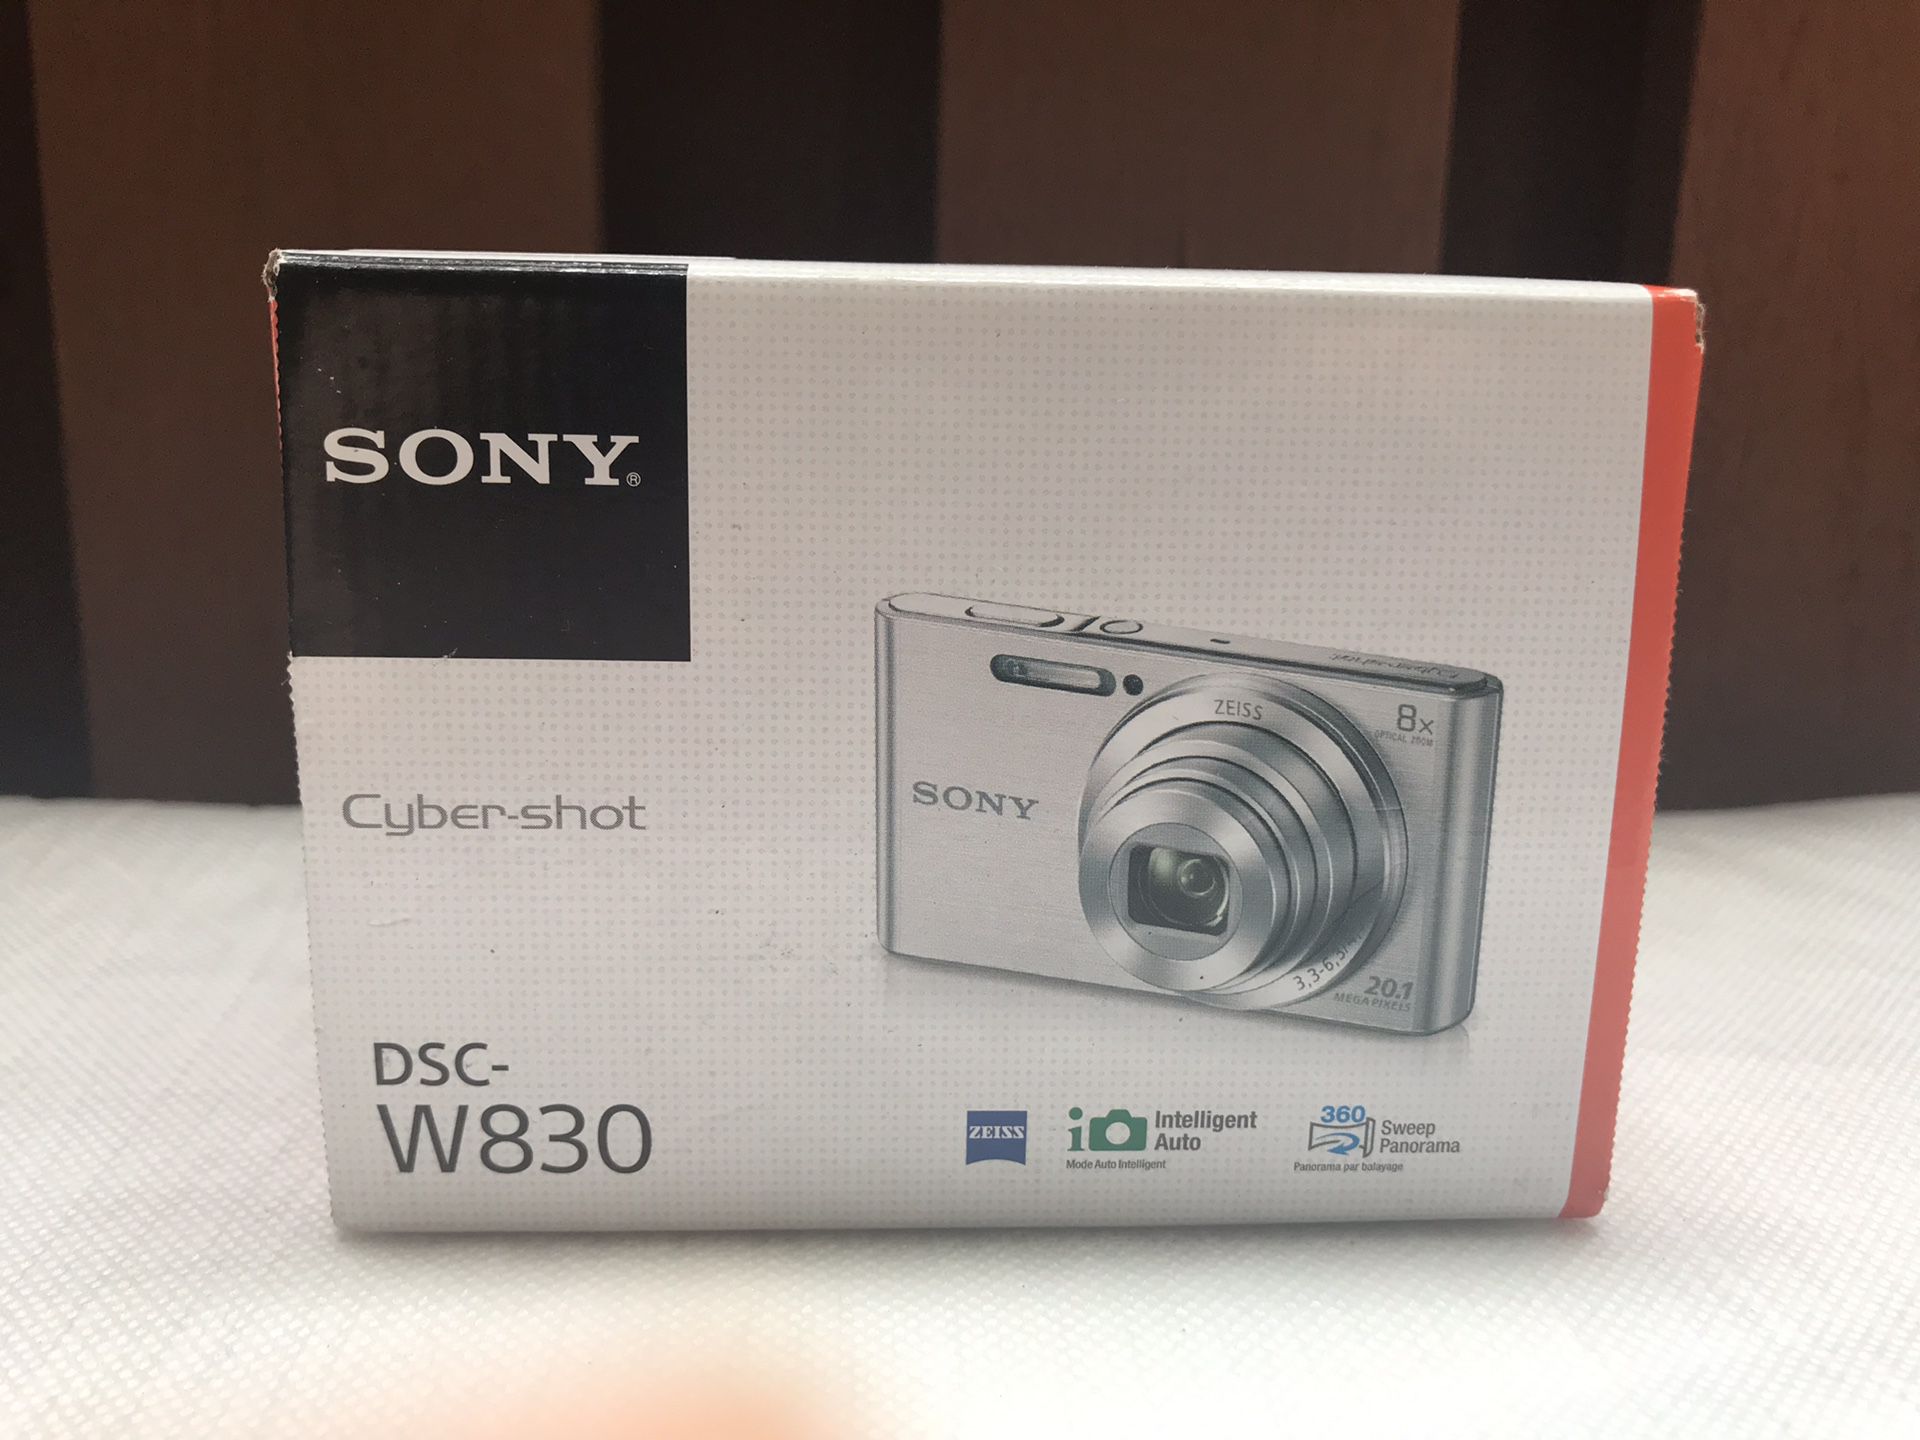 Brand New/Unopened- Sony DSC-W830 Digital Camera with 20.1 Megapixels and 8x Optical Zoom(Black)